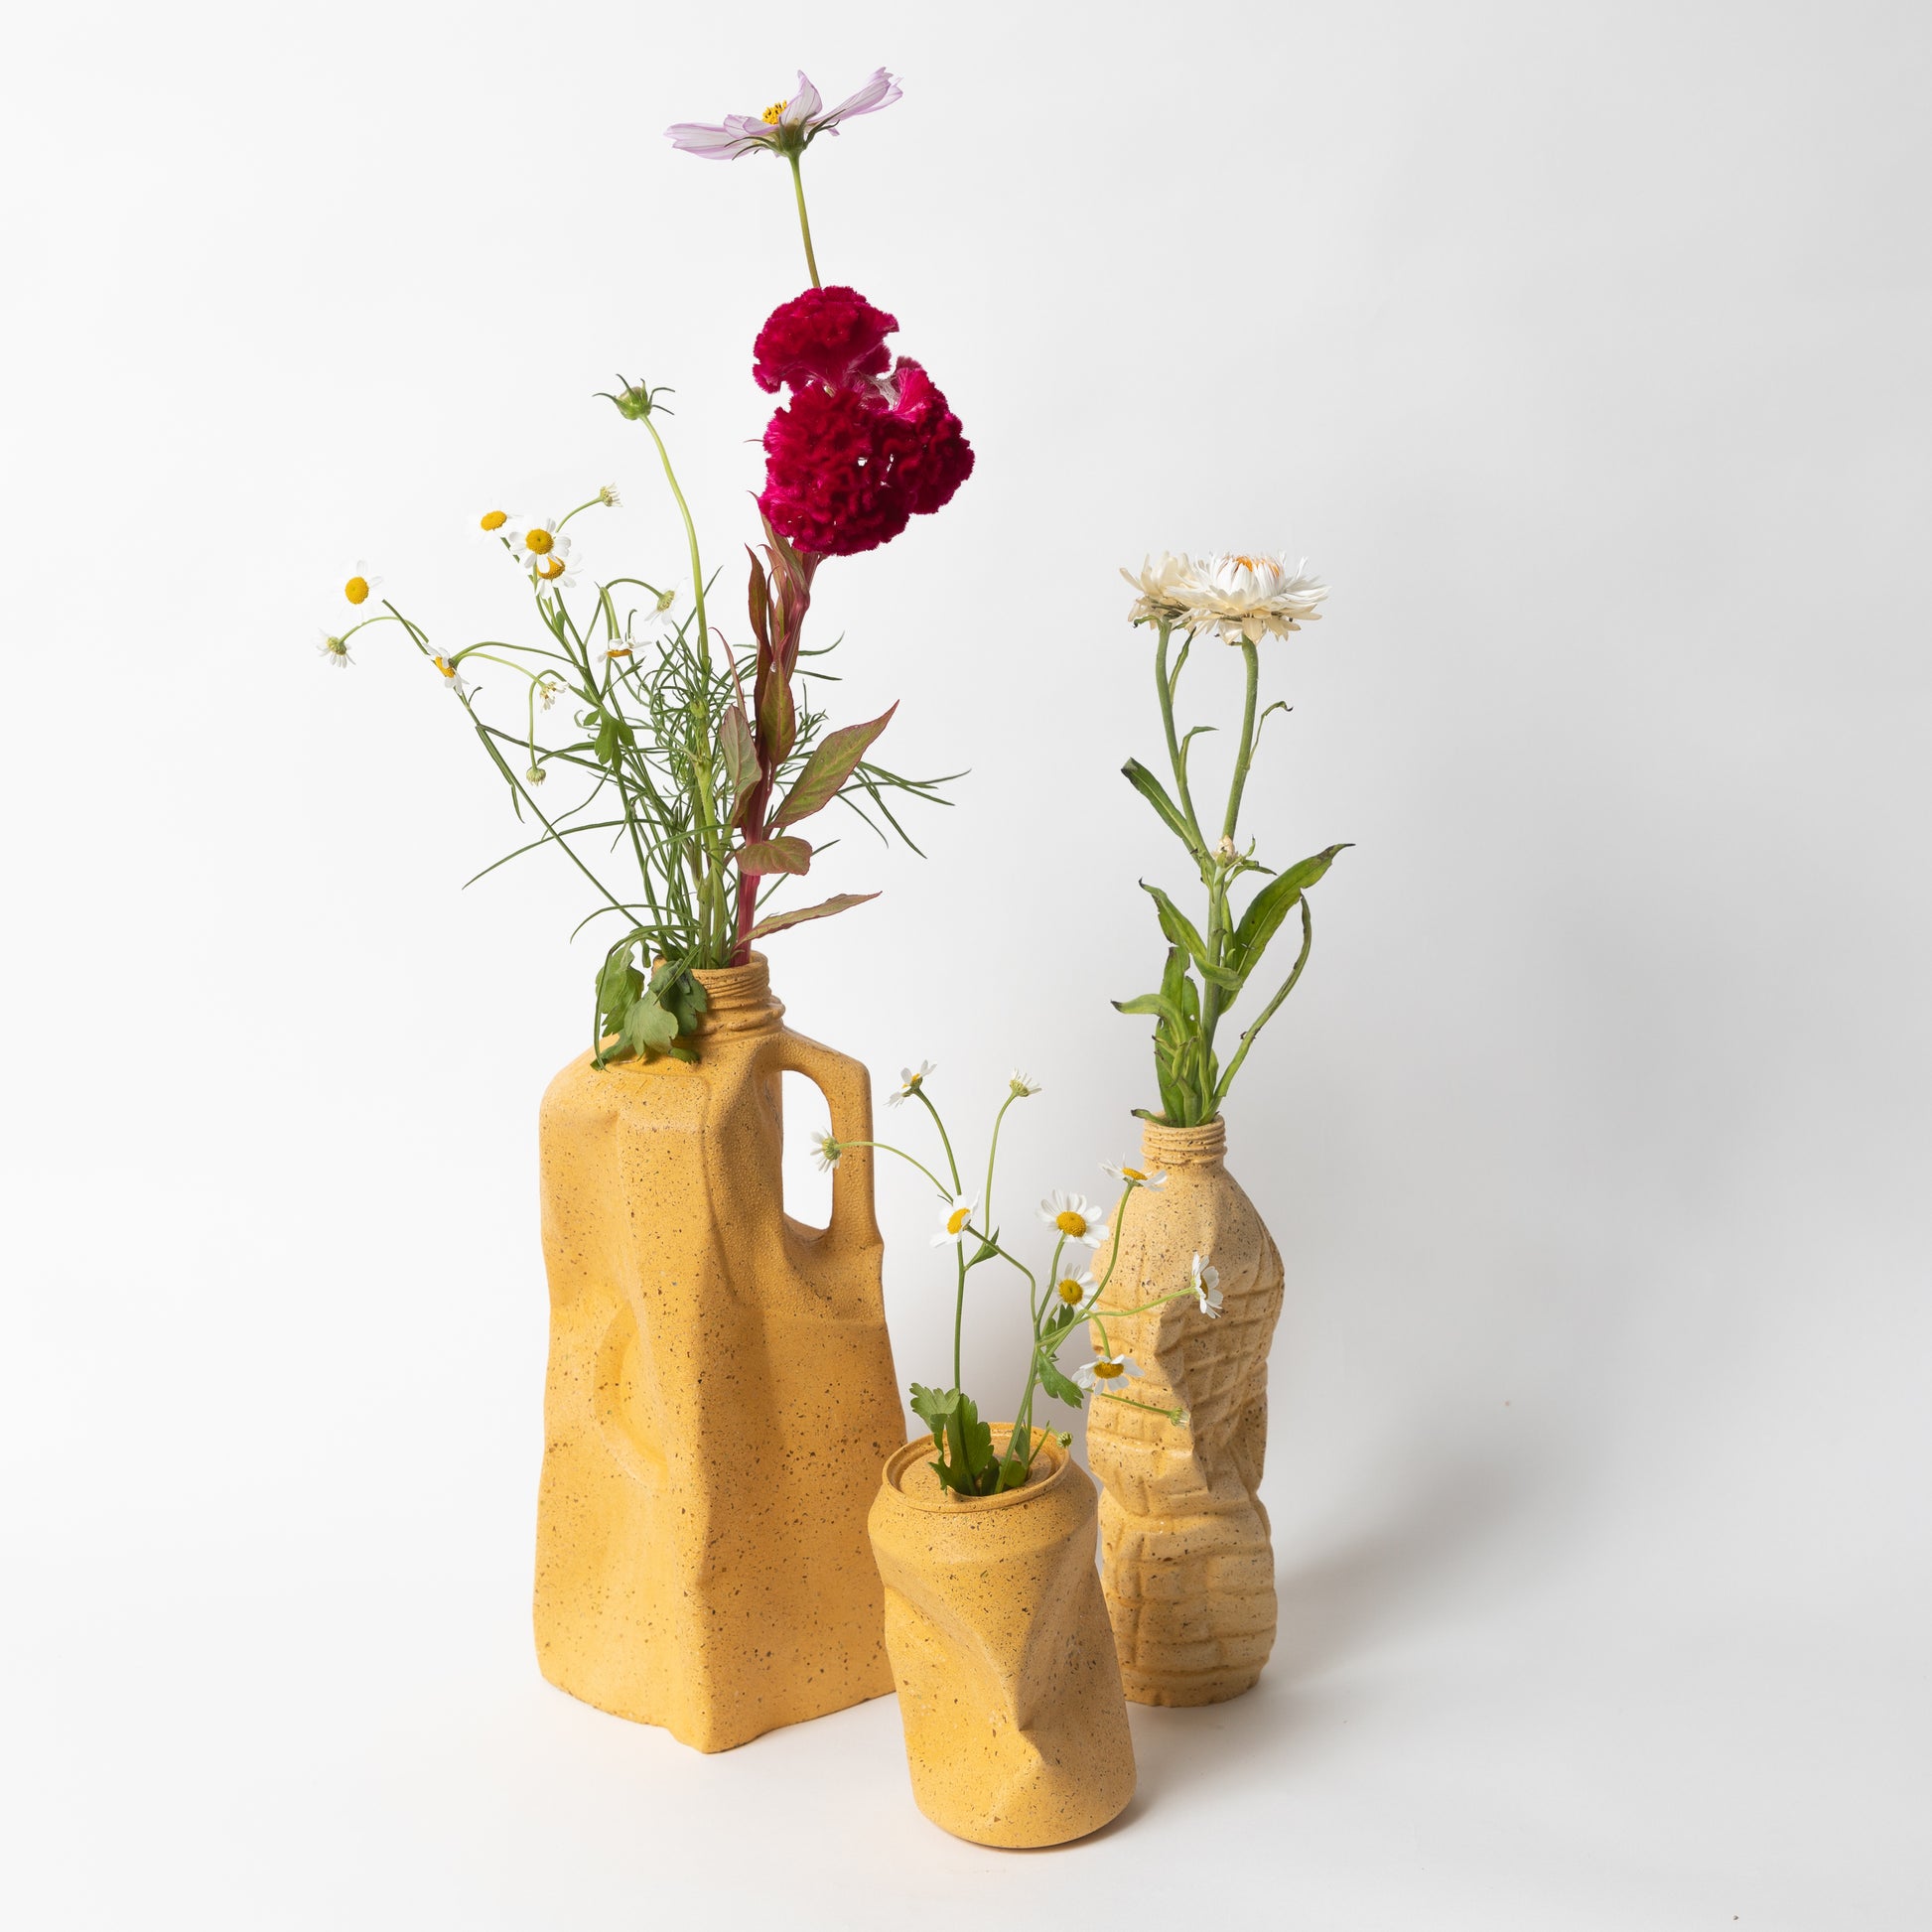 The marigold terrazzo complete set of vases from our Garbage Collection.